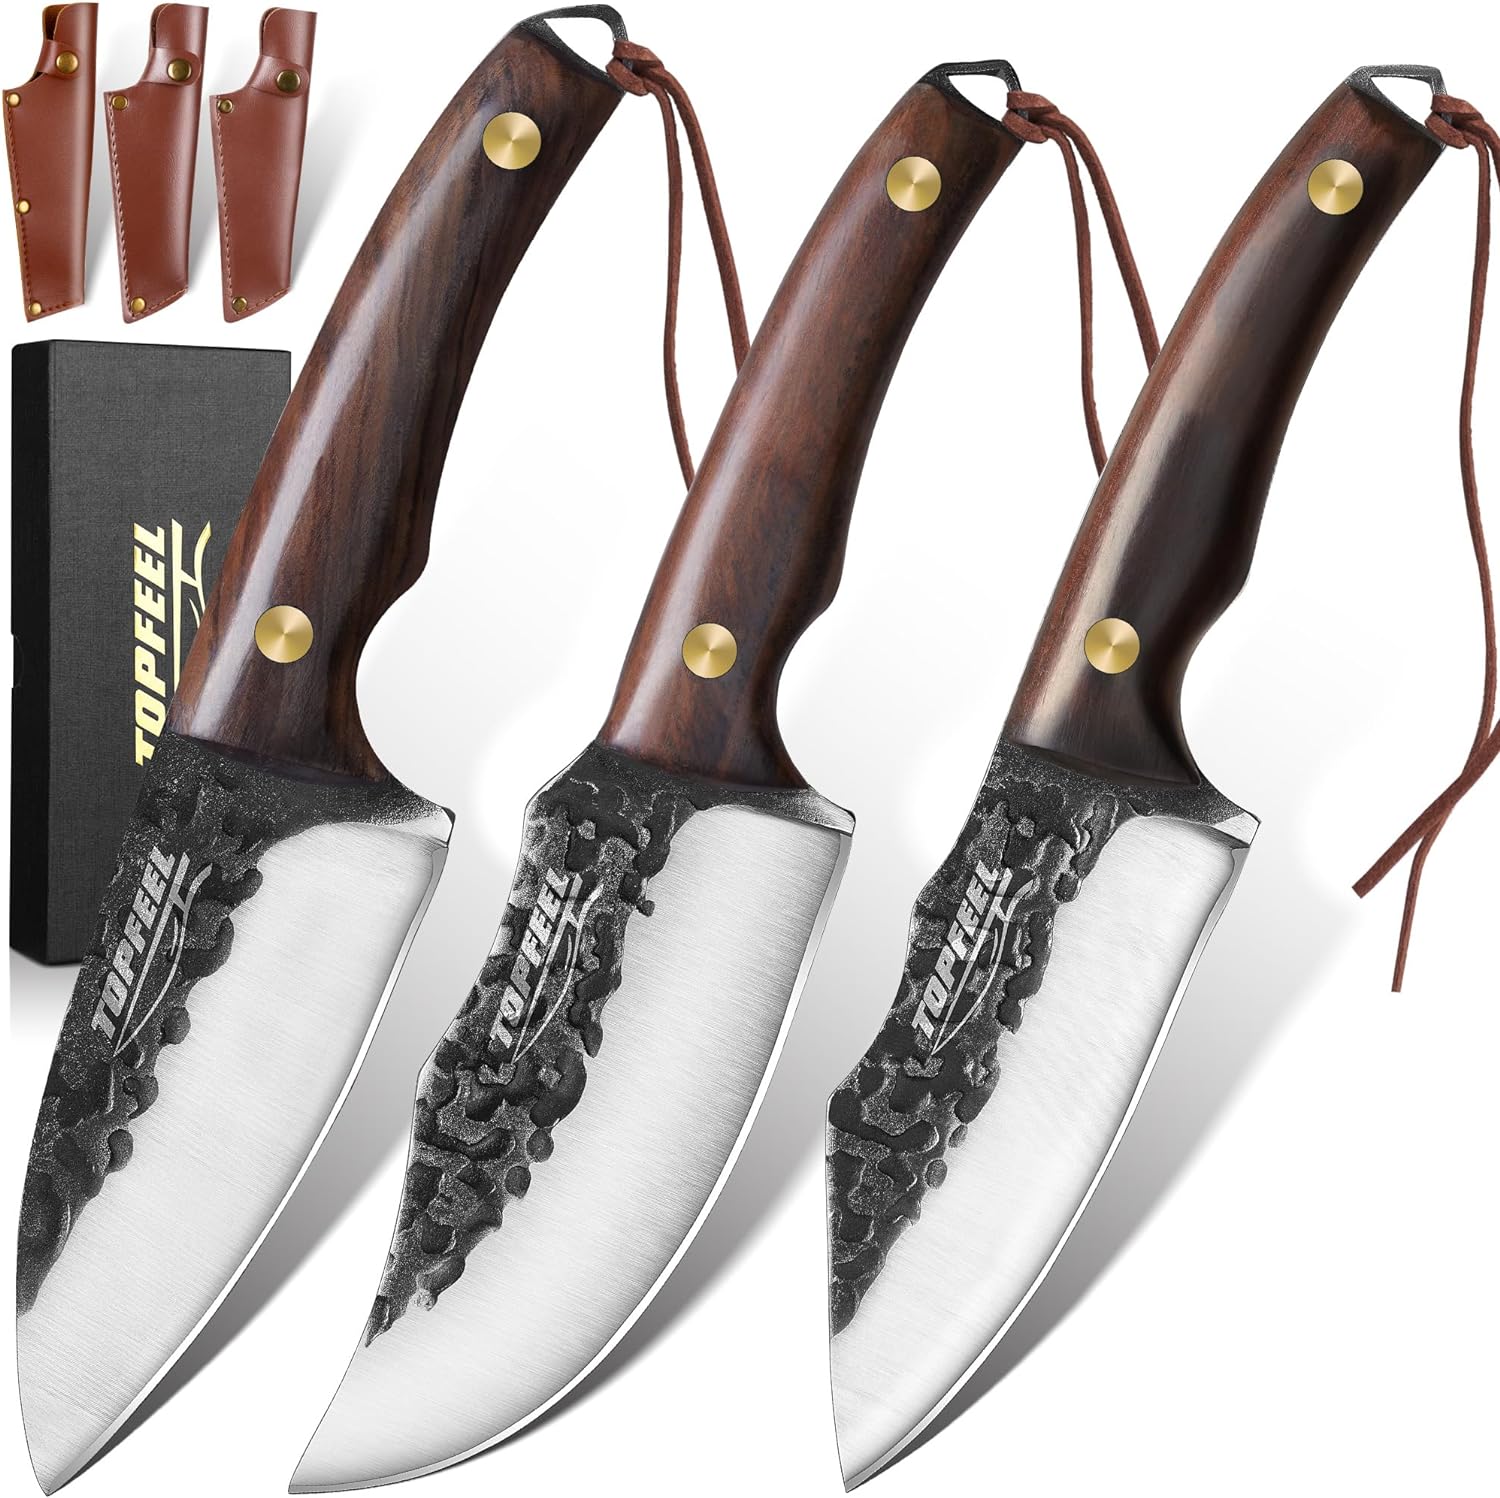 Topfeel 3PCS Viking Knife Set with Sheath Hand Forged Boning Knife Butcher Meat Cleaver Knife Japan Kitchen Knife for Home, Outdoor, BBQ, Camping Father Day Gifts